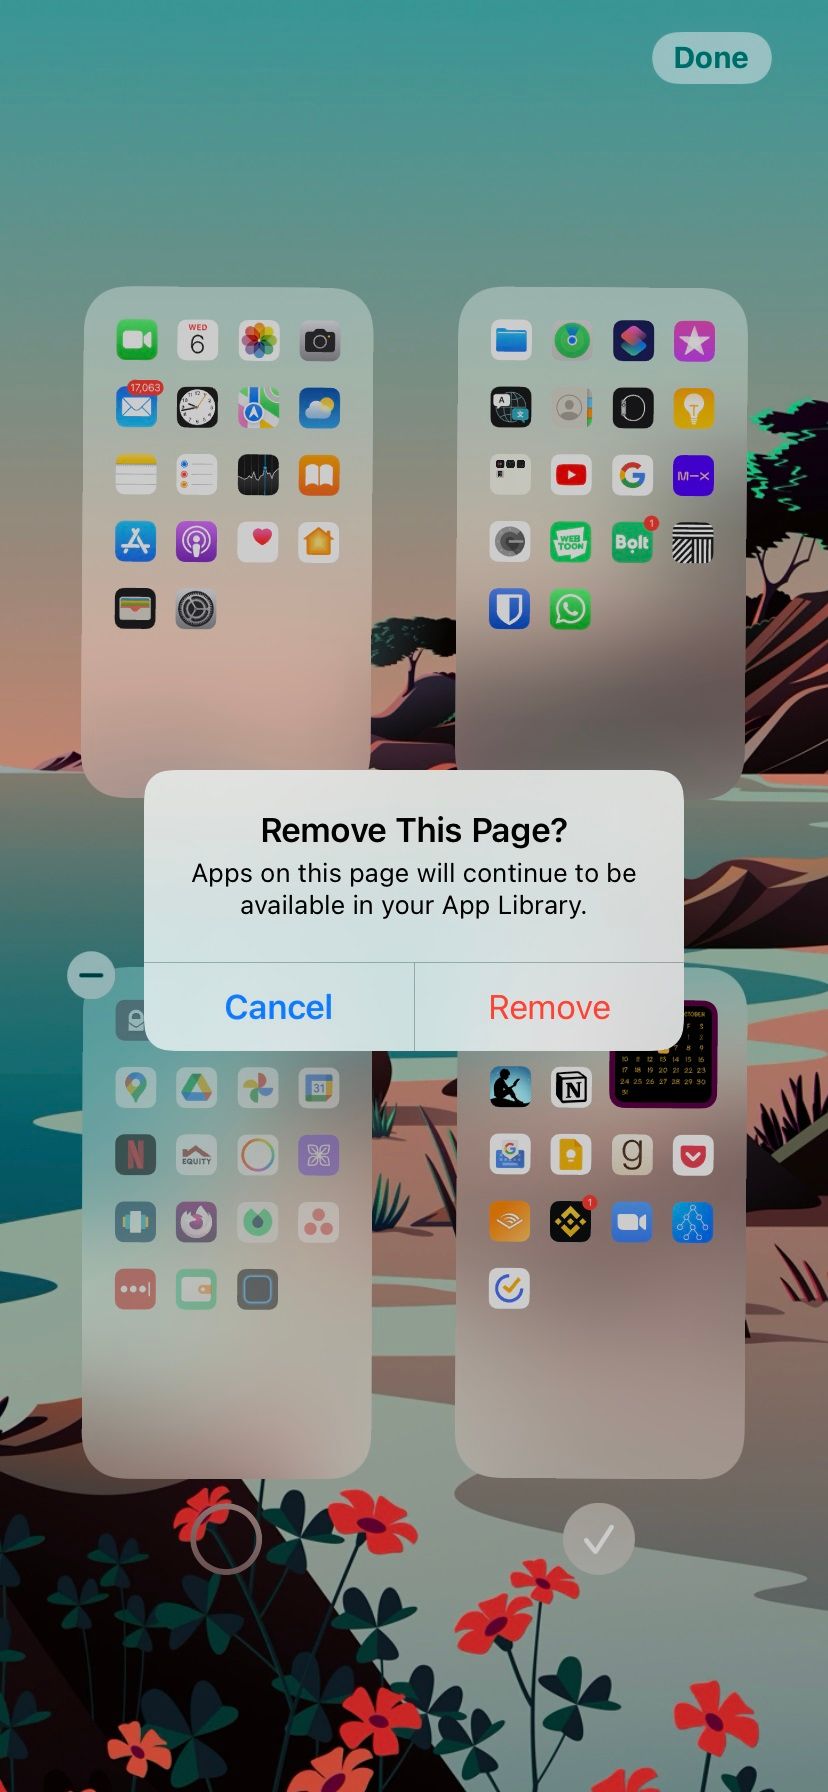 Confirmation pop-up when deleting a Home screen page